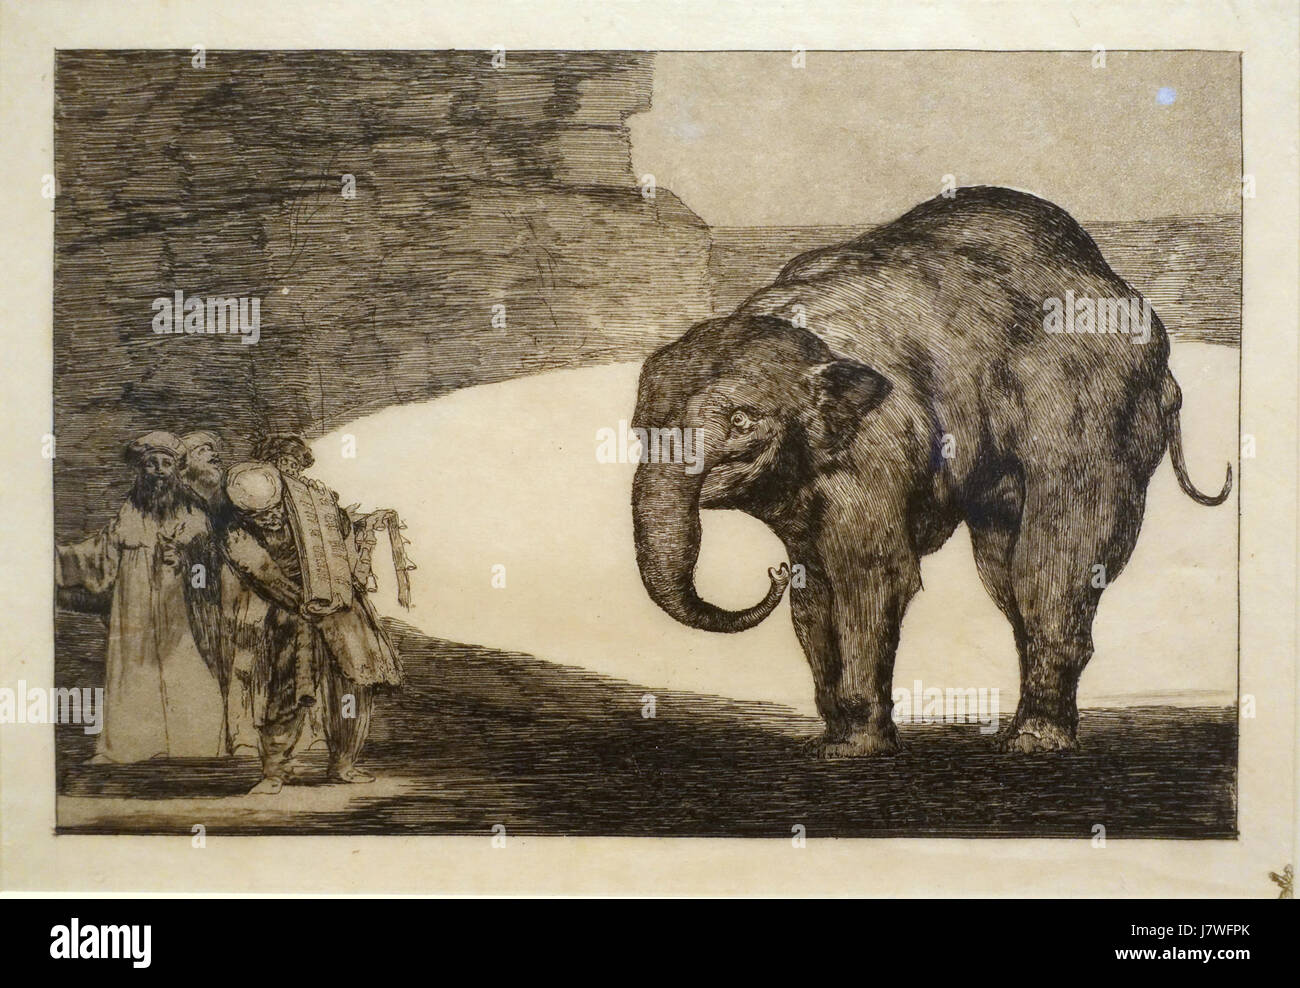 Animal foolishness (Other laws for the people), by Francisco de Goya y Lucientes, 1815 1824, etching and aquatint on Japanese paper   Museum Berggruen   DSC03785 Stock Photo